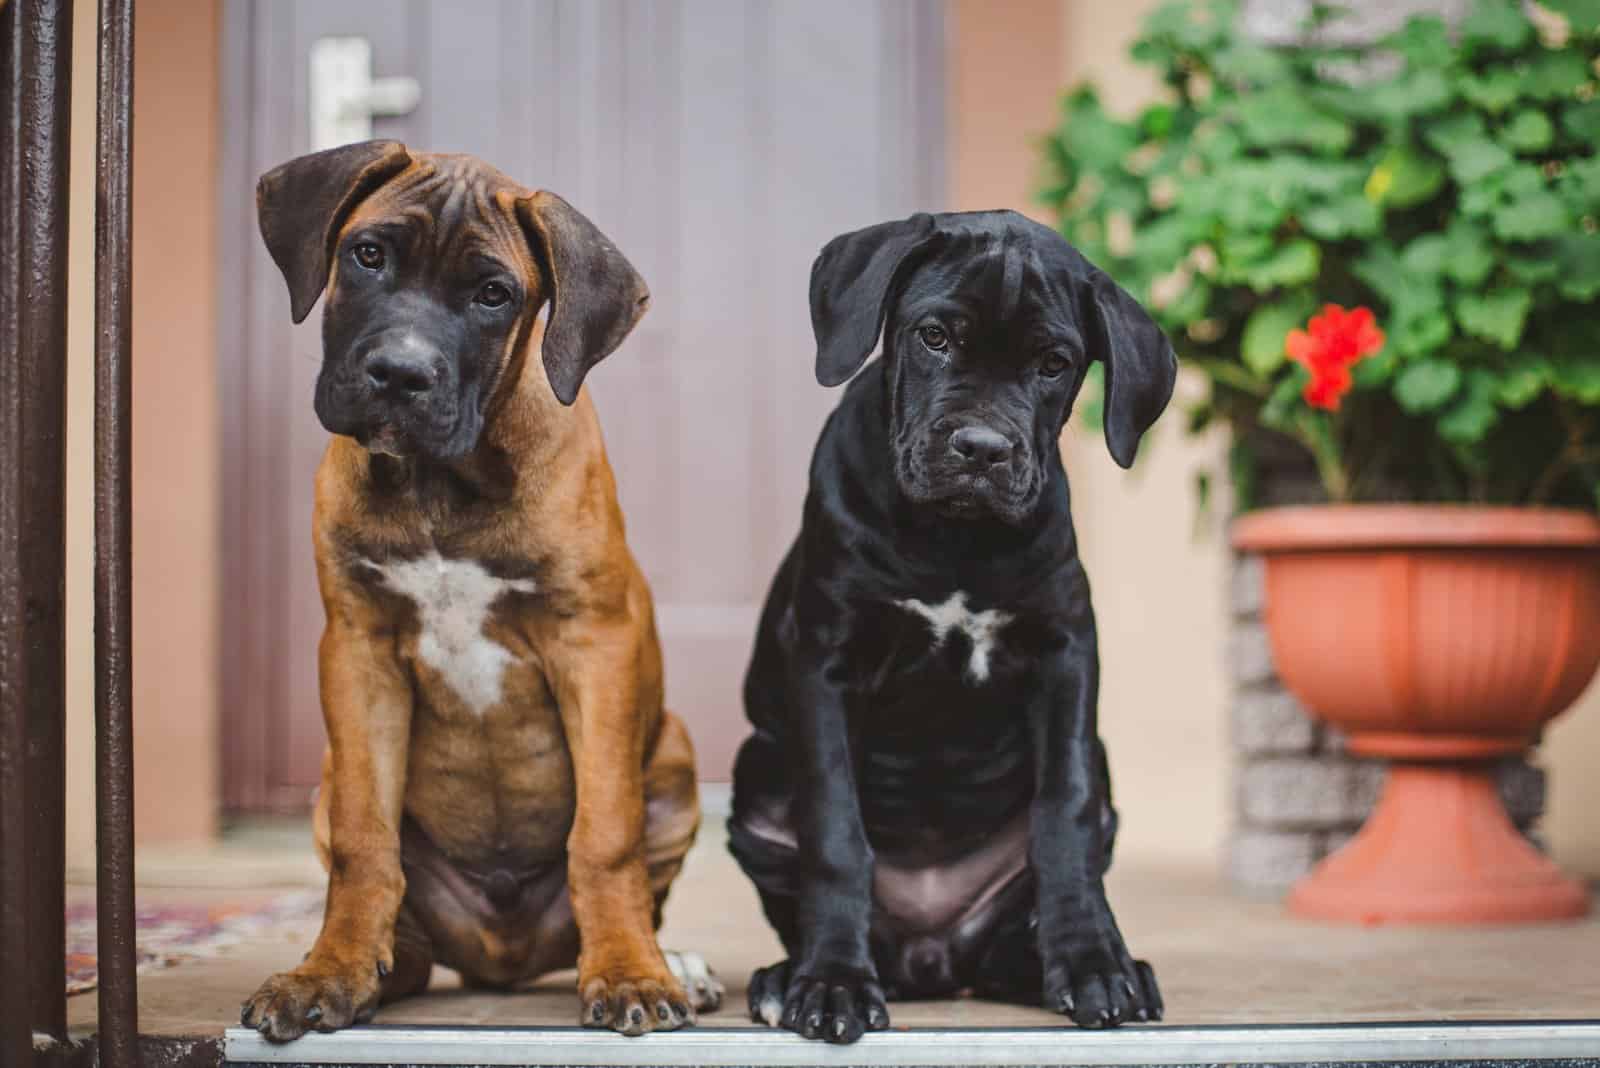 Cane Corso Breeders In Wisconsin: The 1 Best Choice